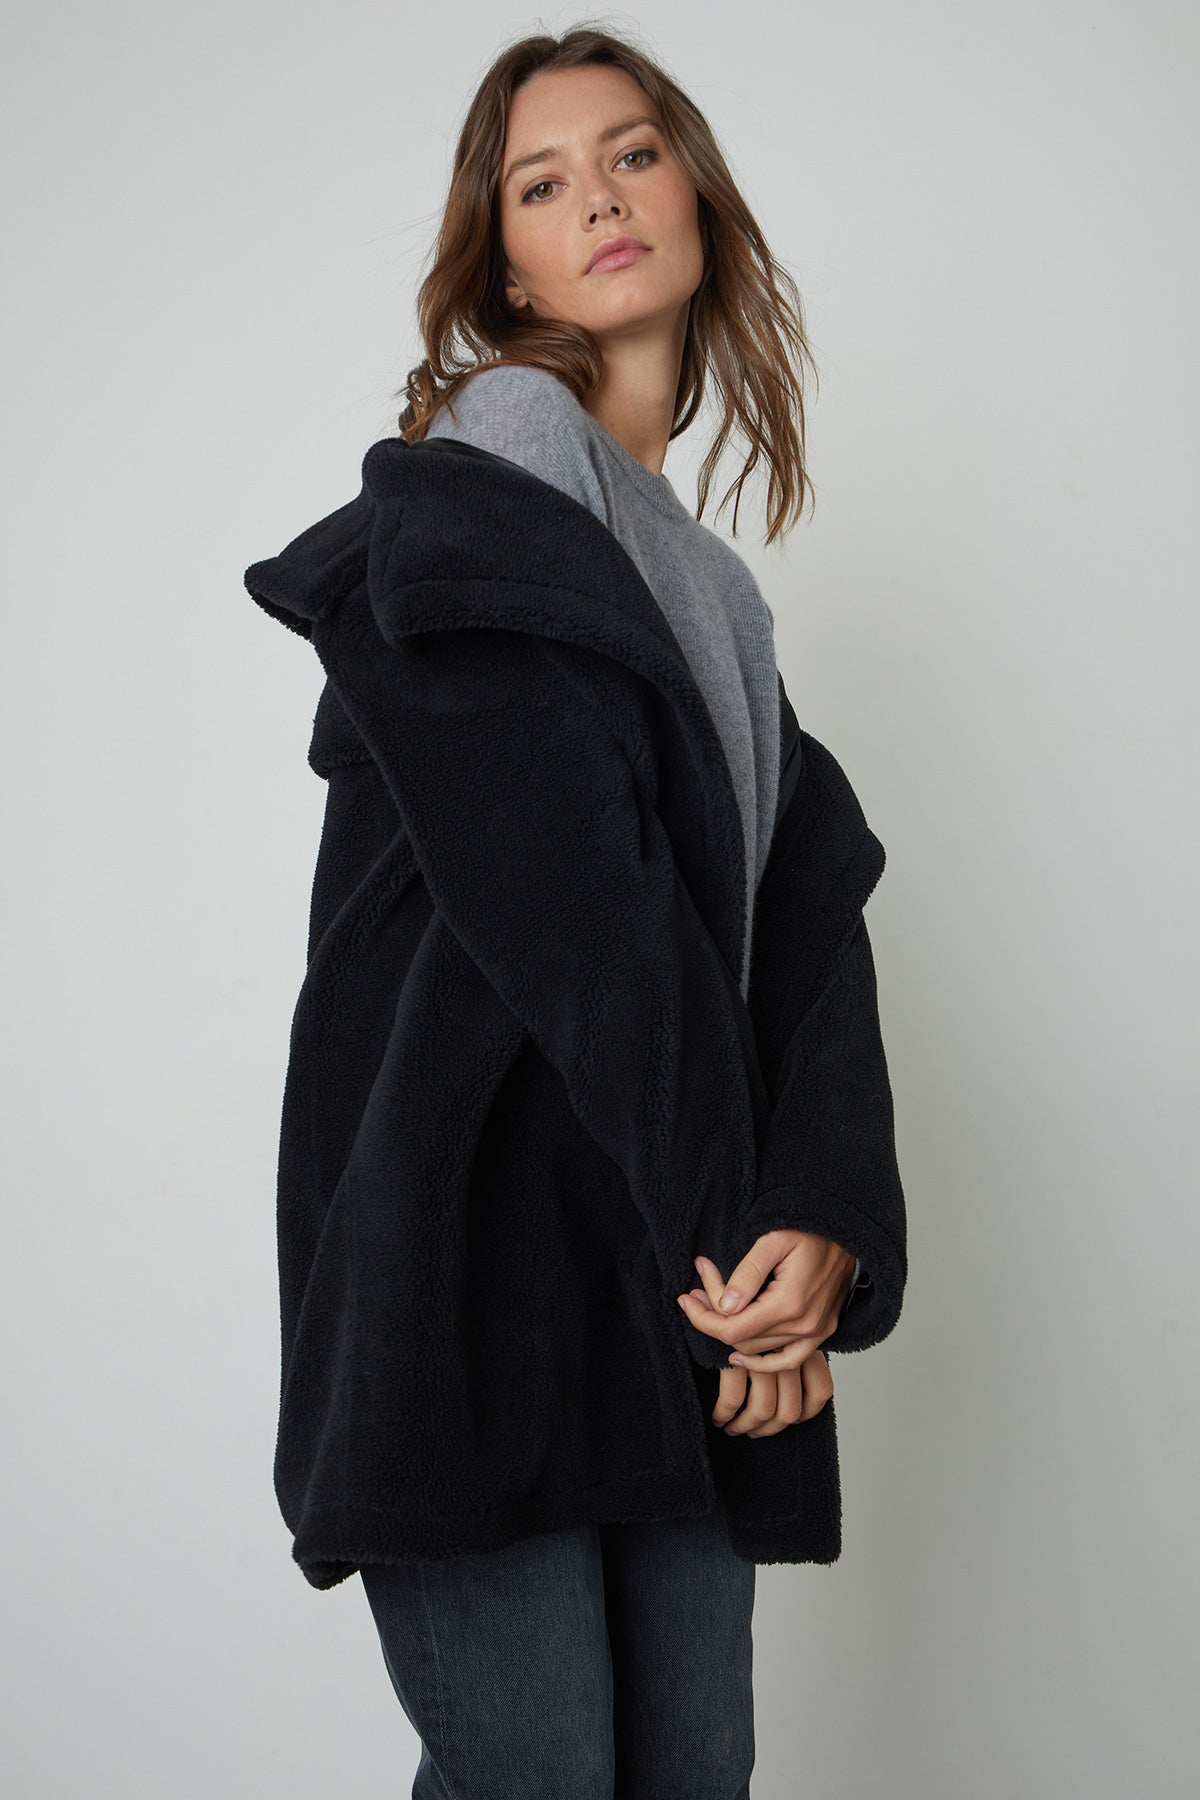 Christine Faux Sherpa Coat in Black Side with Brynne Sweater in Heather Grey-25062152503489